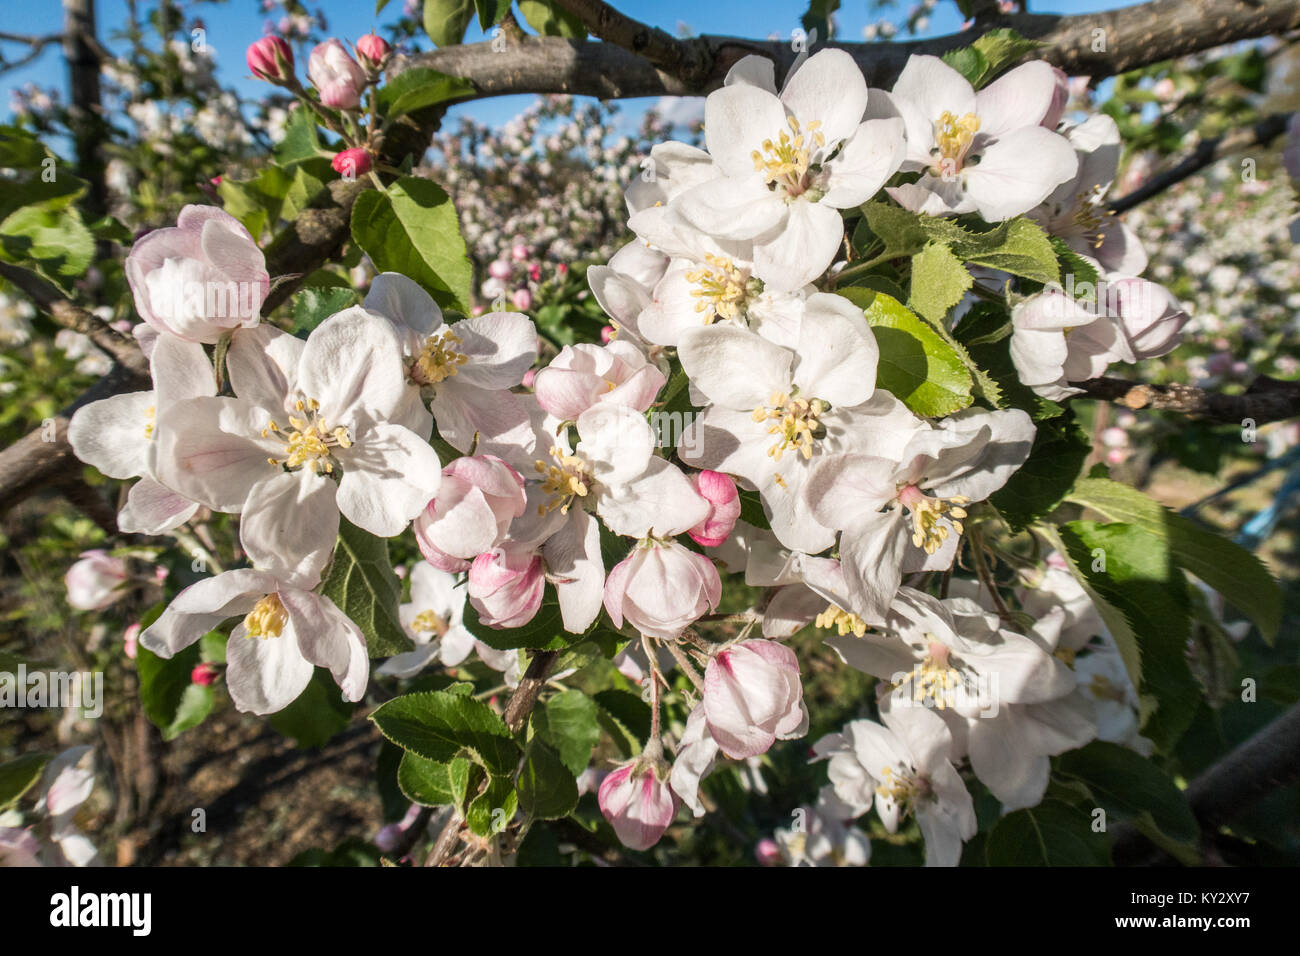 Apple blossom in full bloom at an orchard in East Sussex, UK Stock Photo